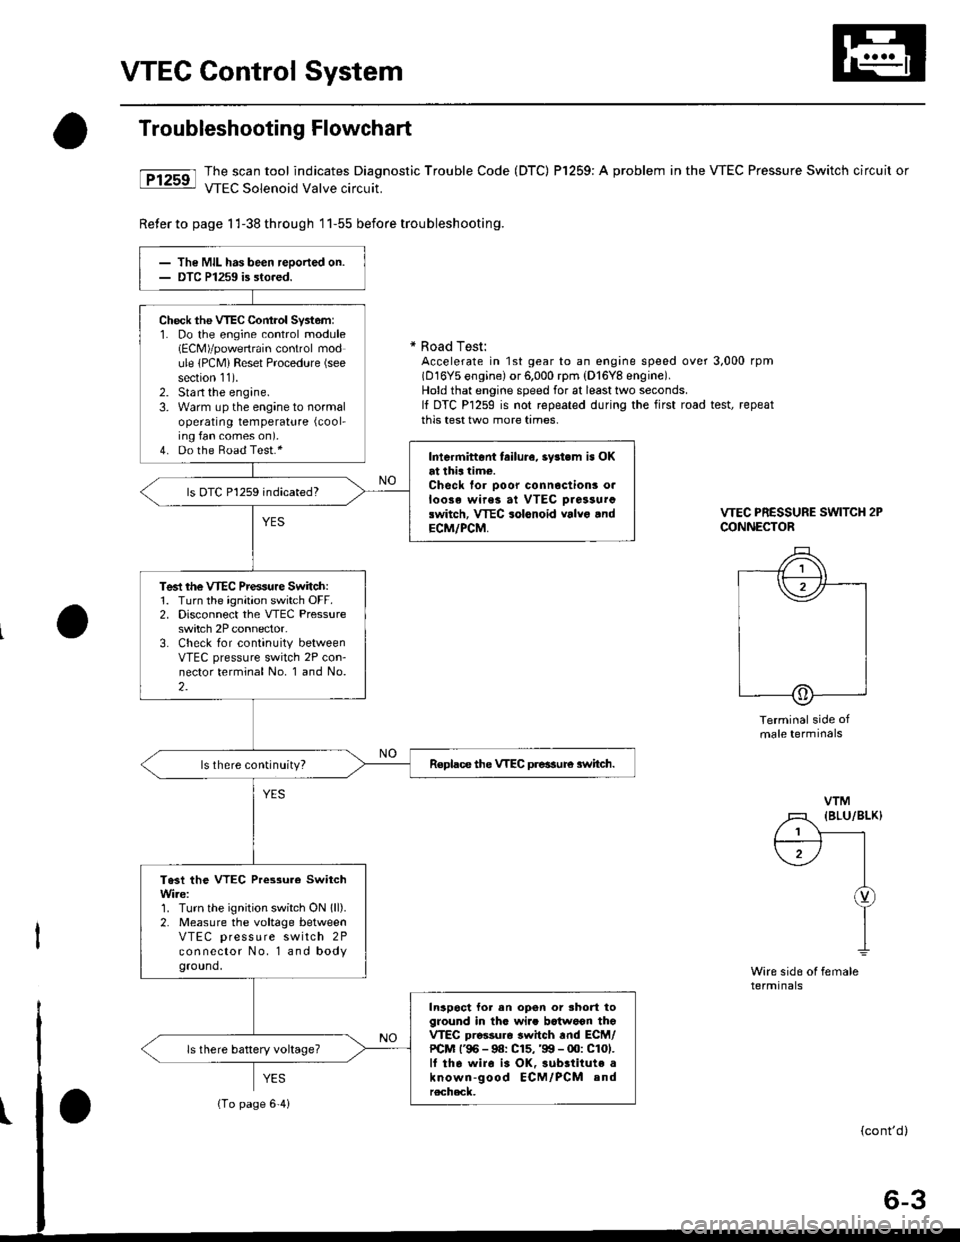 HONDA CIVIC 1996 6.G Workshop Manual VTEC Control System
Troubleshooting Flowchart
tFtrsrl #ilH:::lj1t:"J:T,?ffnostic 
rrouble code (Drc) Pr25e: A probrem in the vrEc Pressure switch circuit or
Reter to page 1 l-38 th roug h 1 1-55 befor